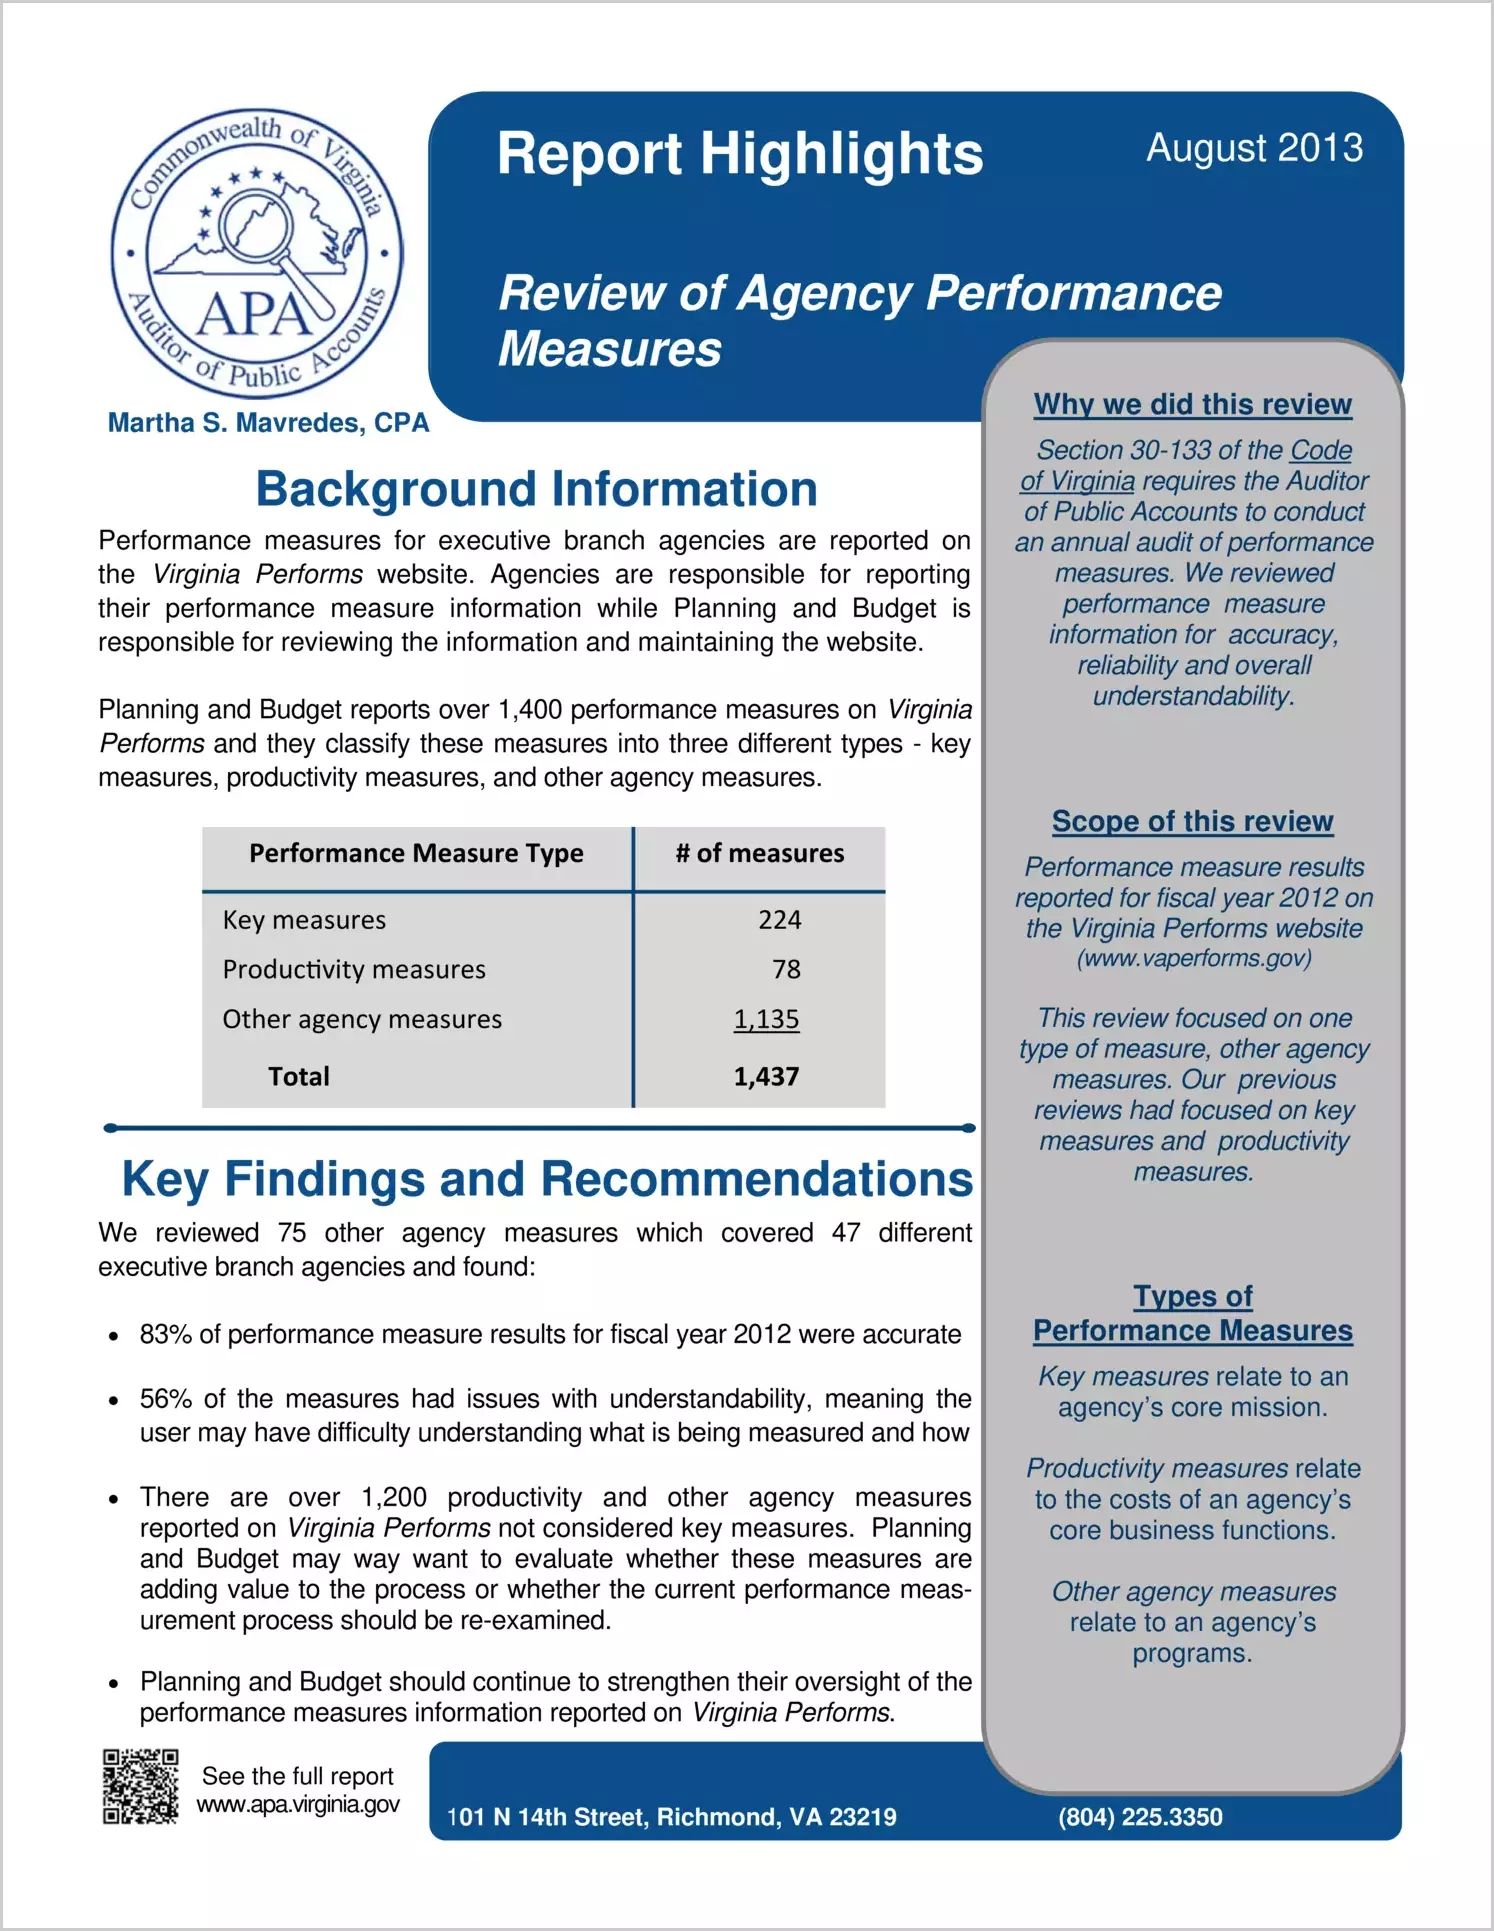 Review of Agency Performance Measures Report for the Year Ended June 30, 2012 - Executive Summary